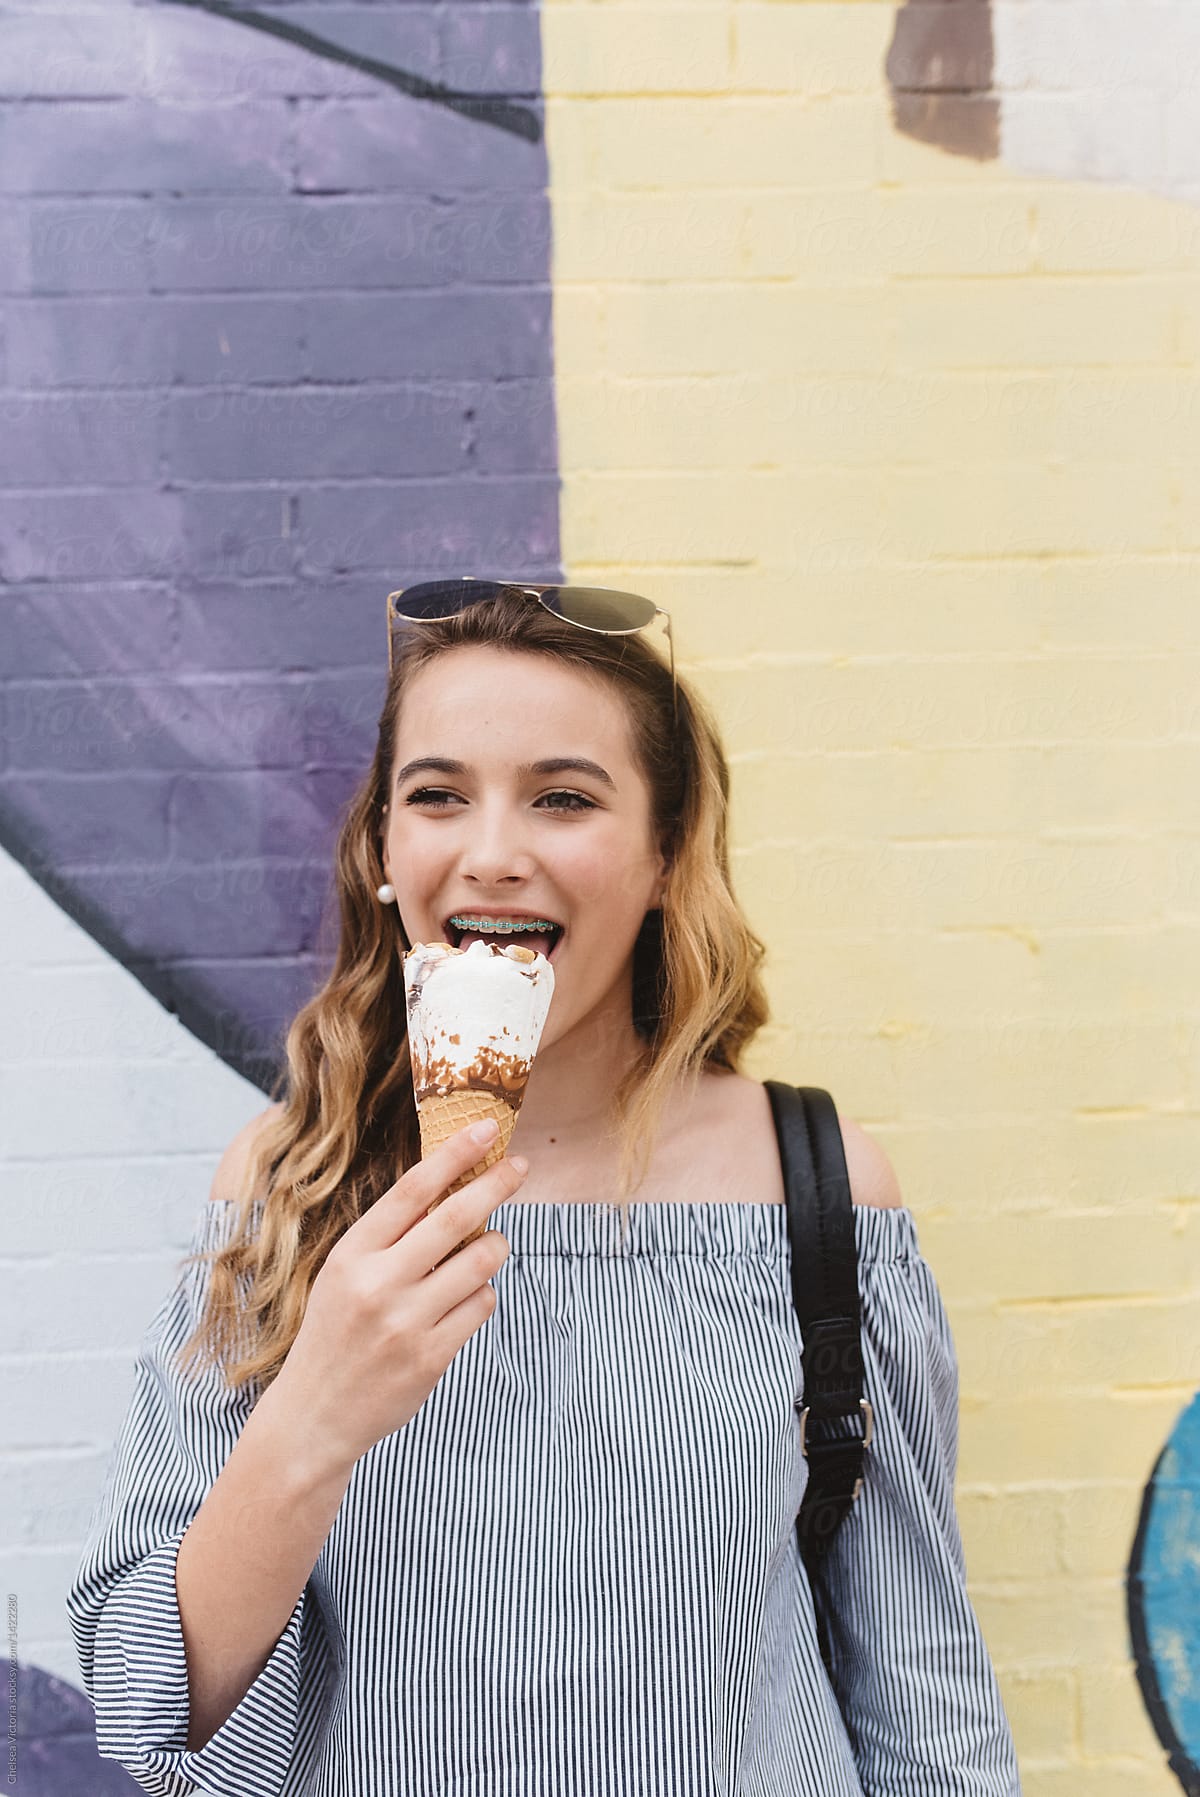 A Teenage Girl Eating Ice Cream In The City By Stocksy Contributor Chelsea Victoria Stocksy